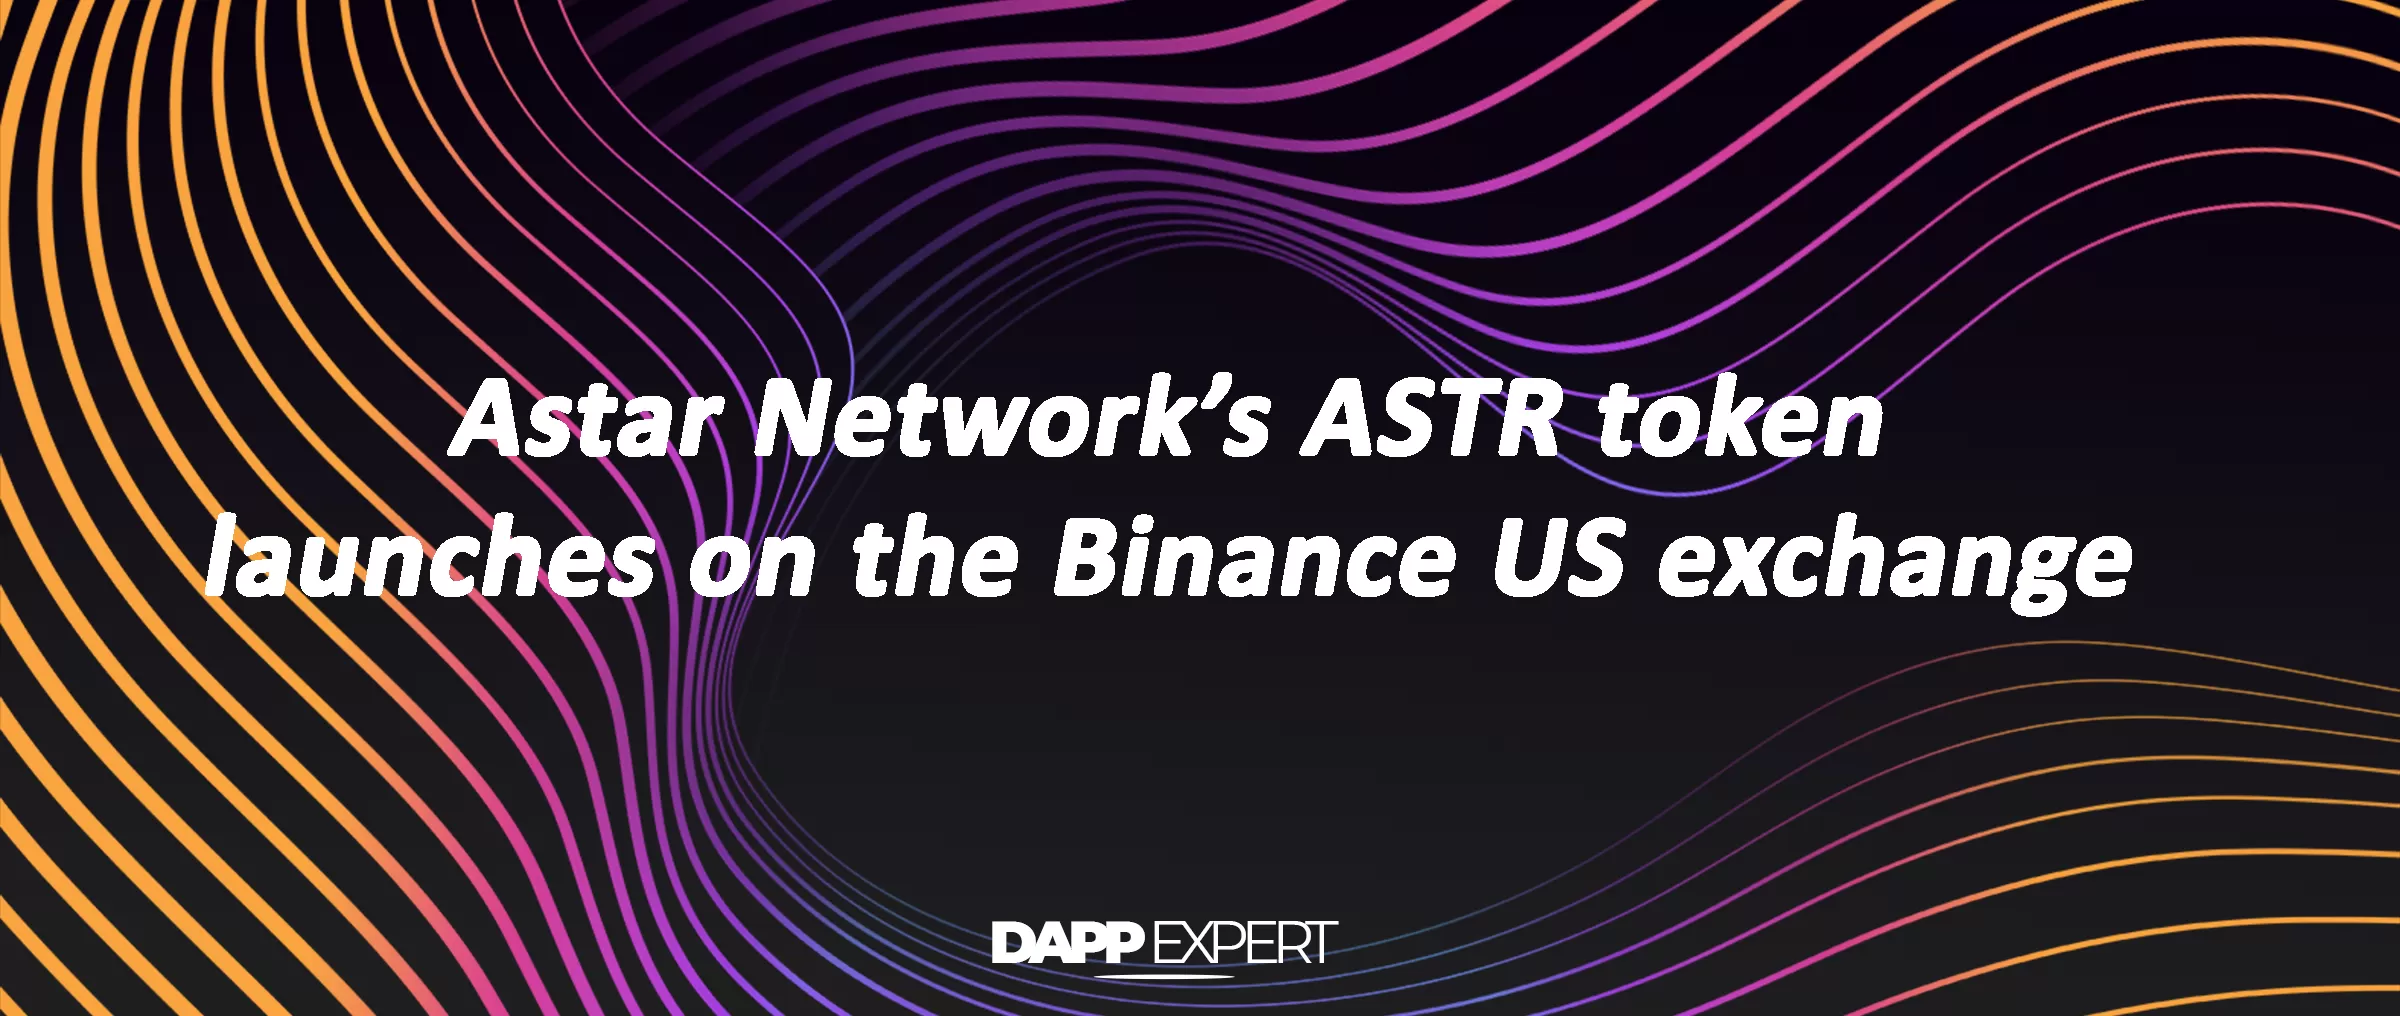 Astar Network’s ASTR token launches on the Binance US exchange